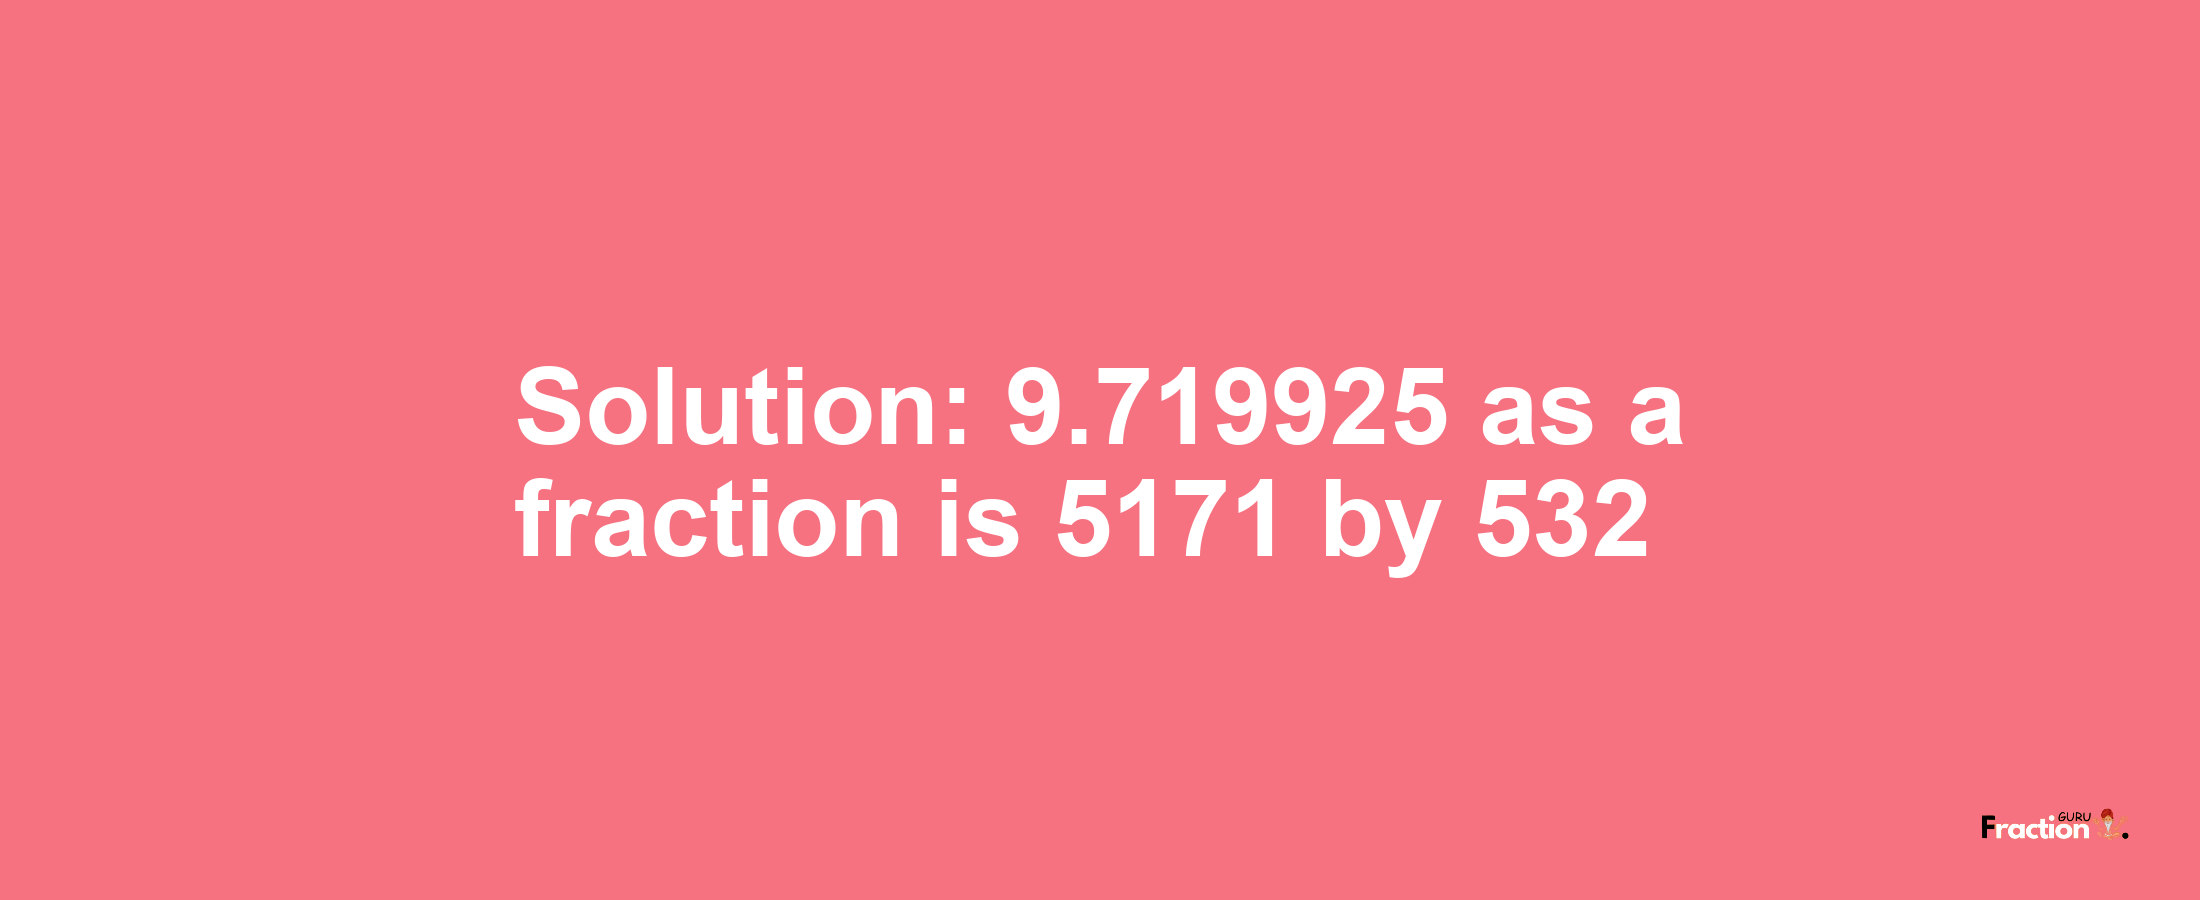 Solution:9.719925 as a fraction is 5171/532